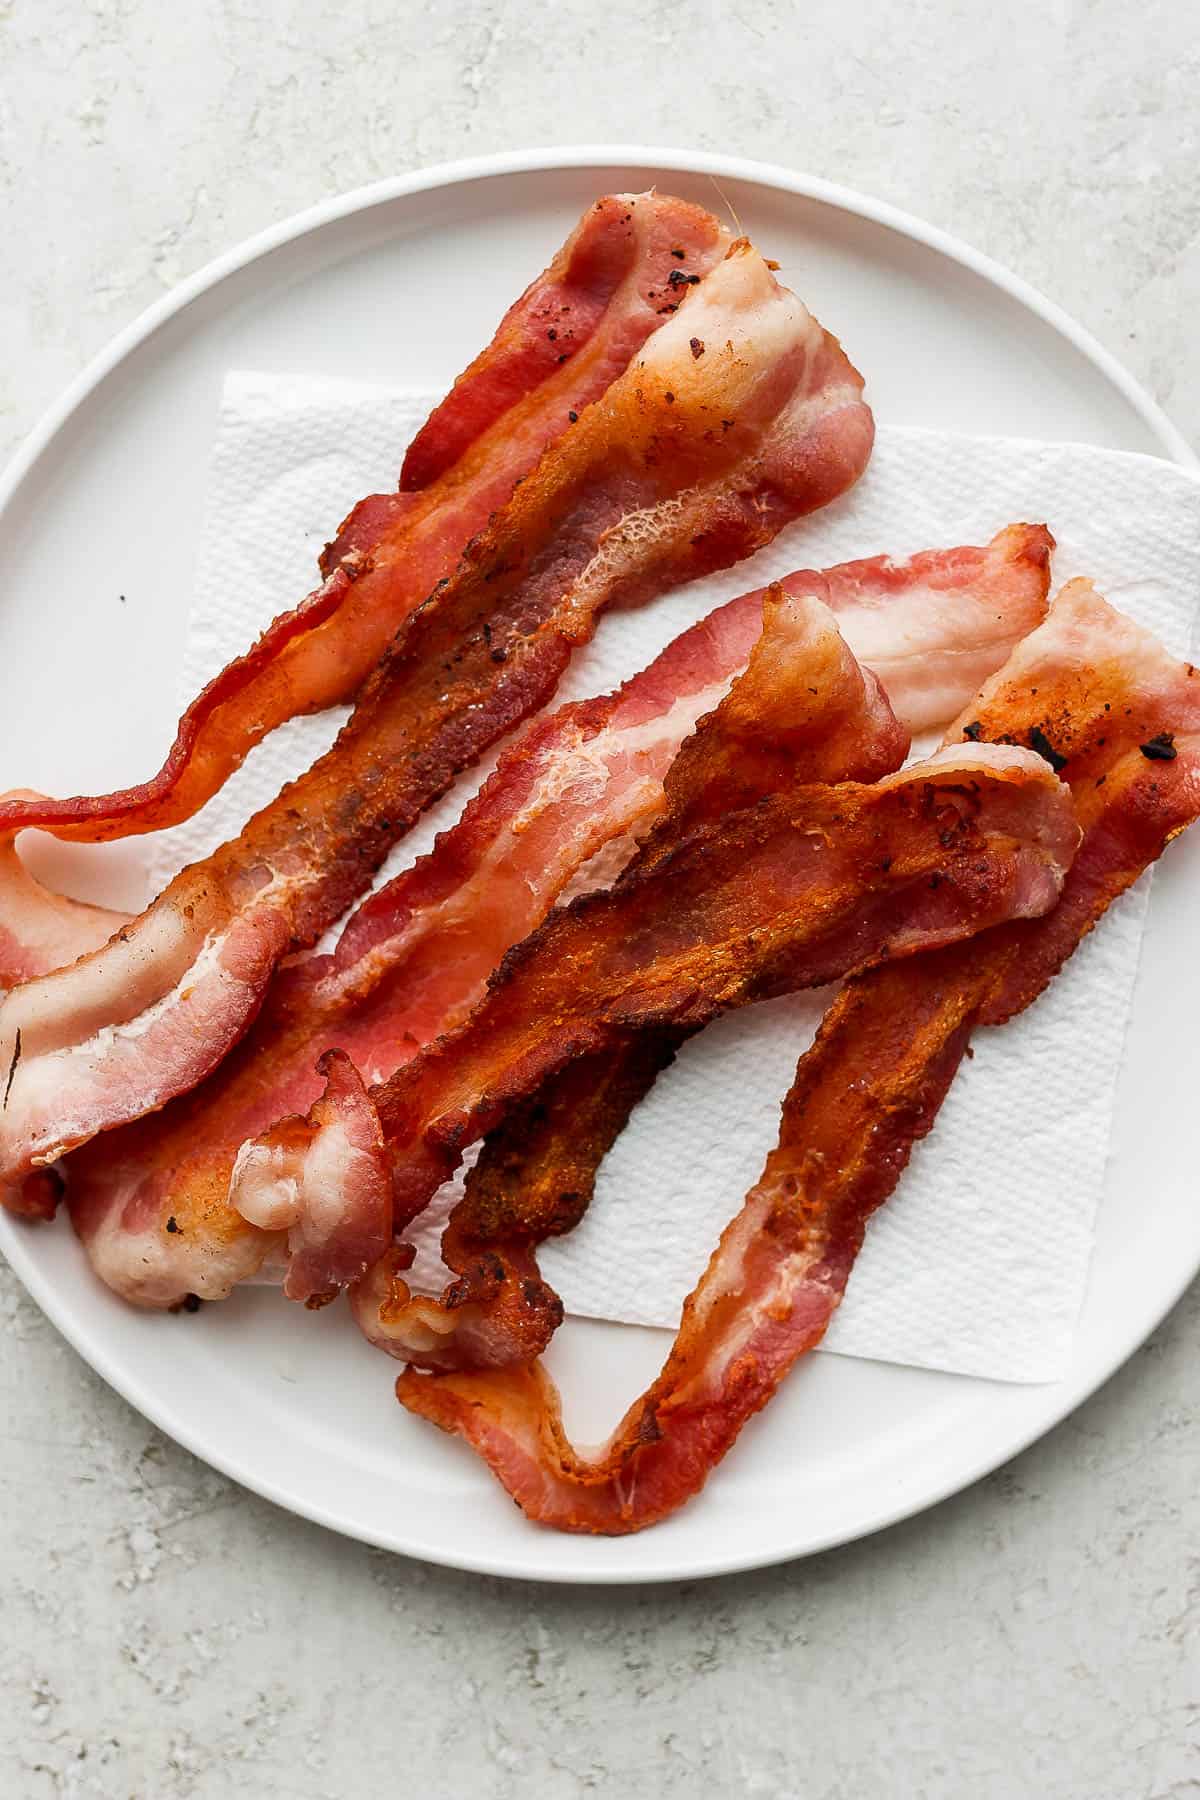 Cooked bacon strips on a paper towel-lined plate.